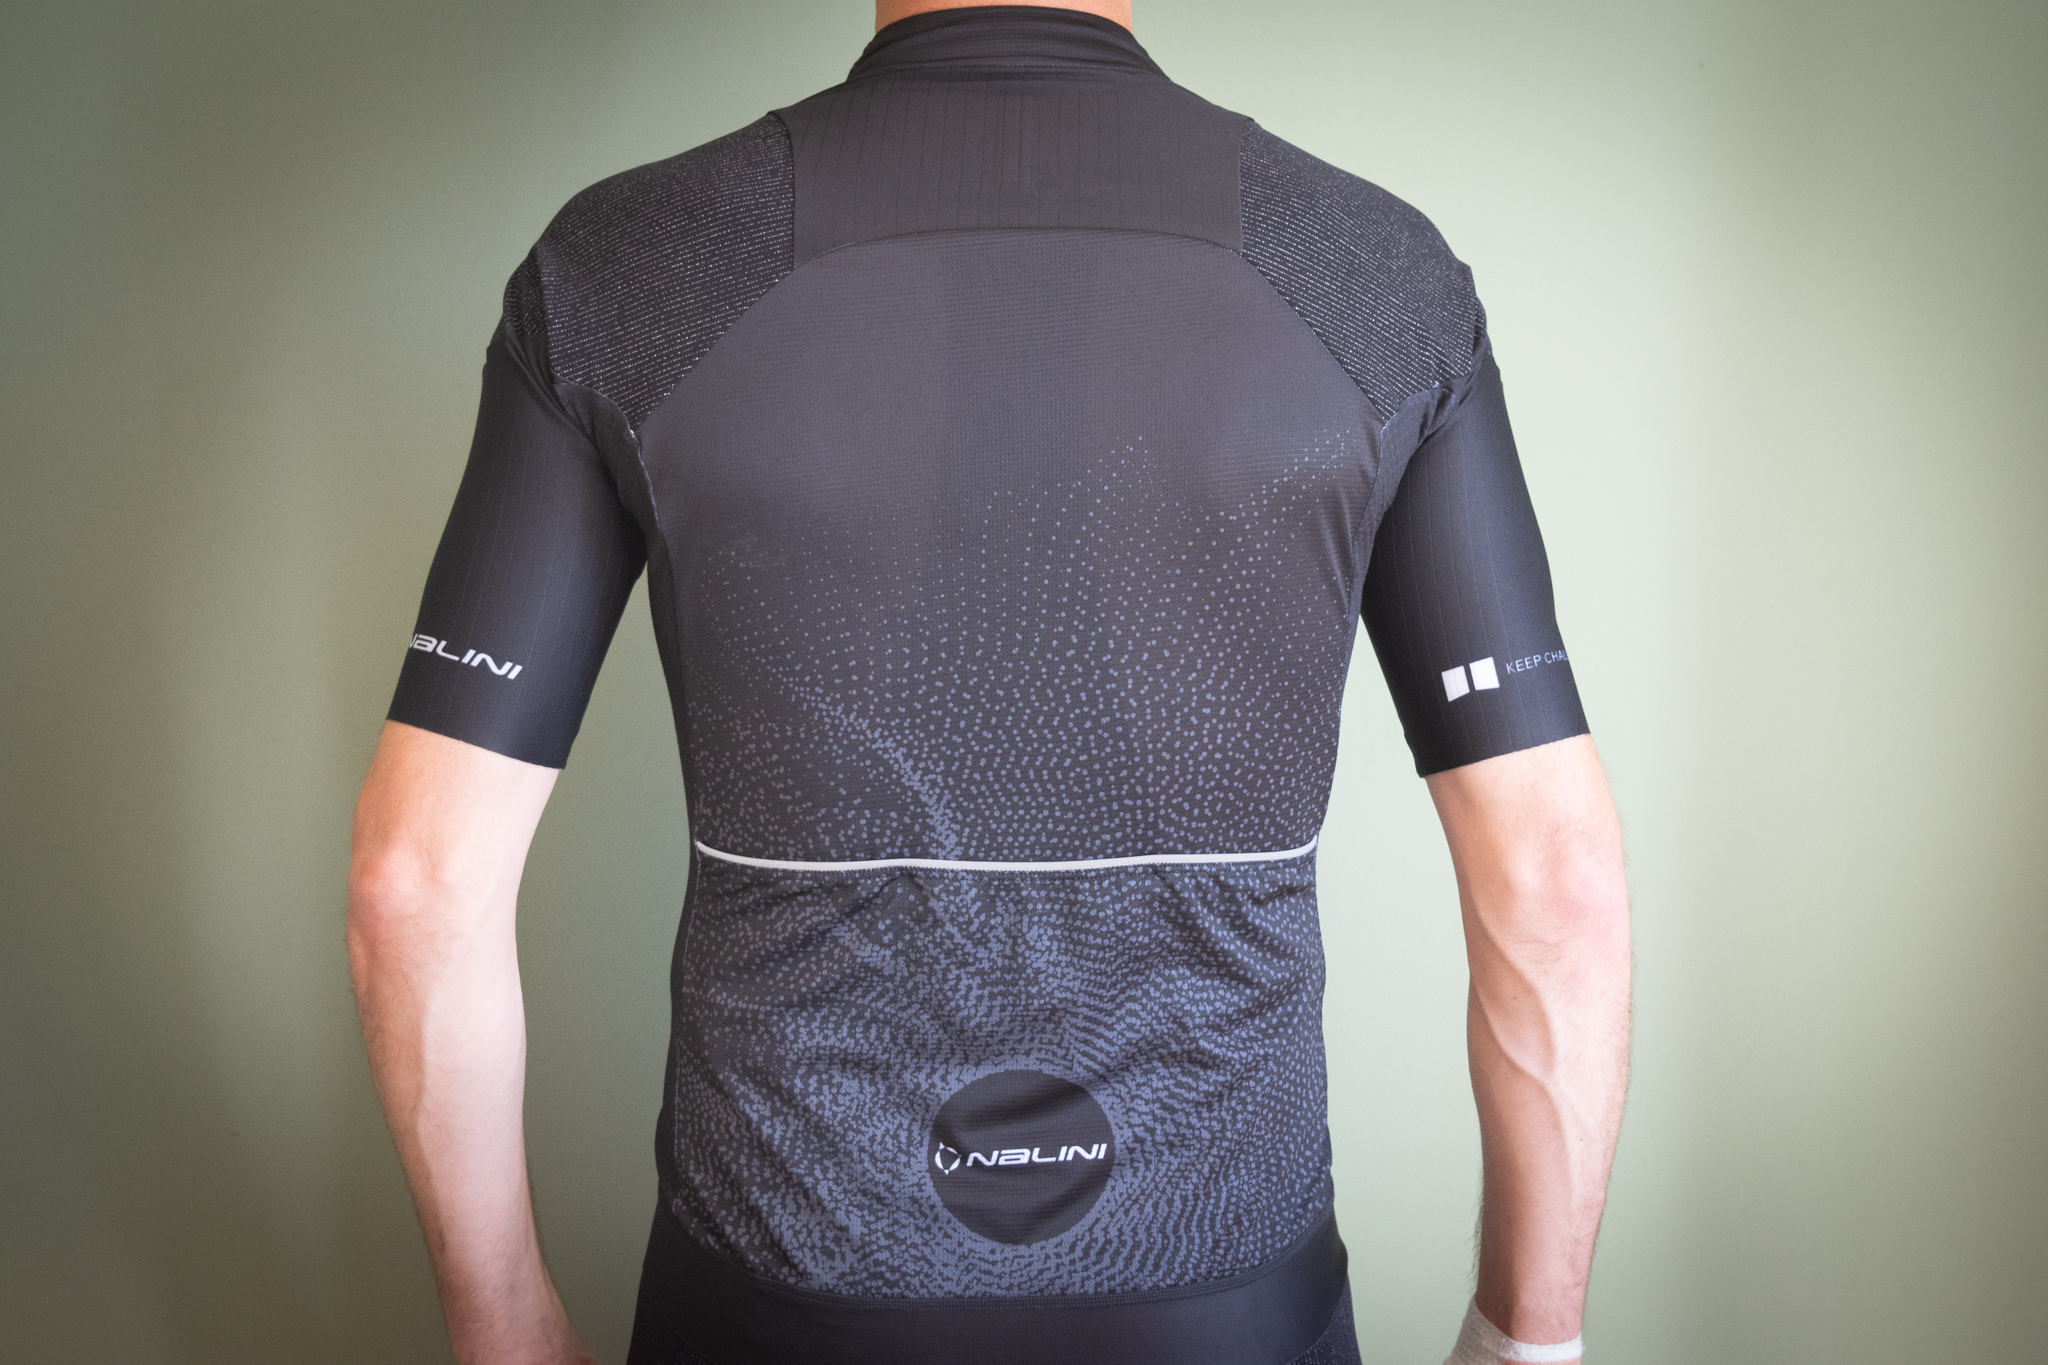 I rode the Nalini Dyneema kit into a wall so you don't have to ...